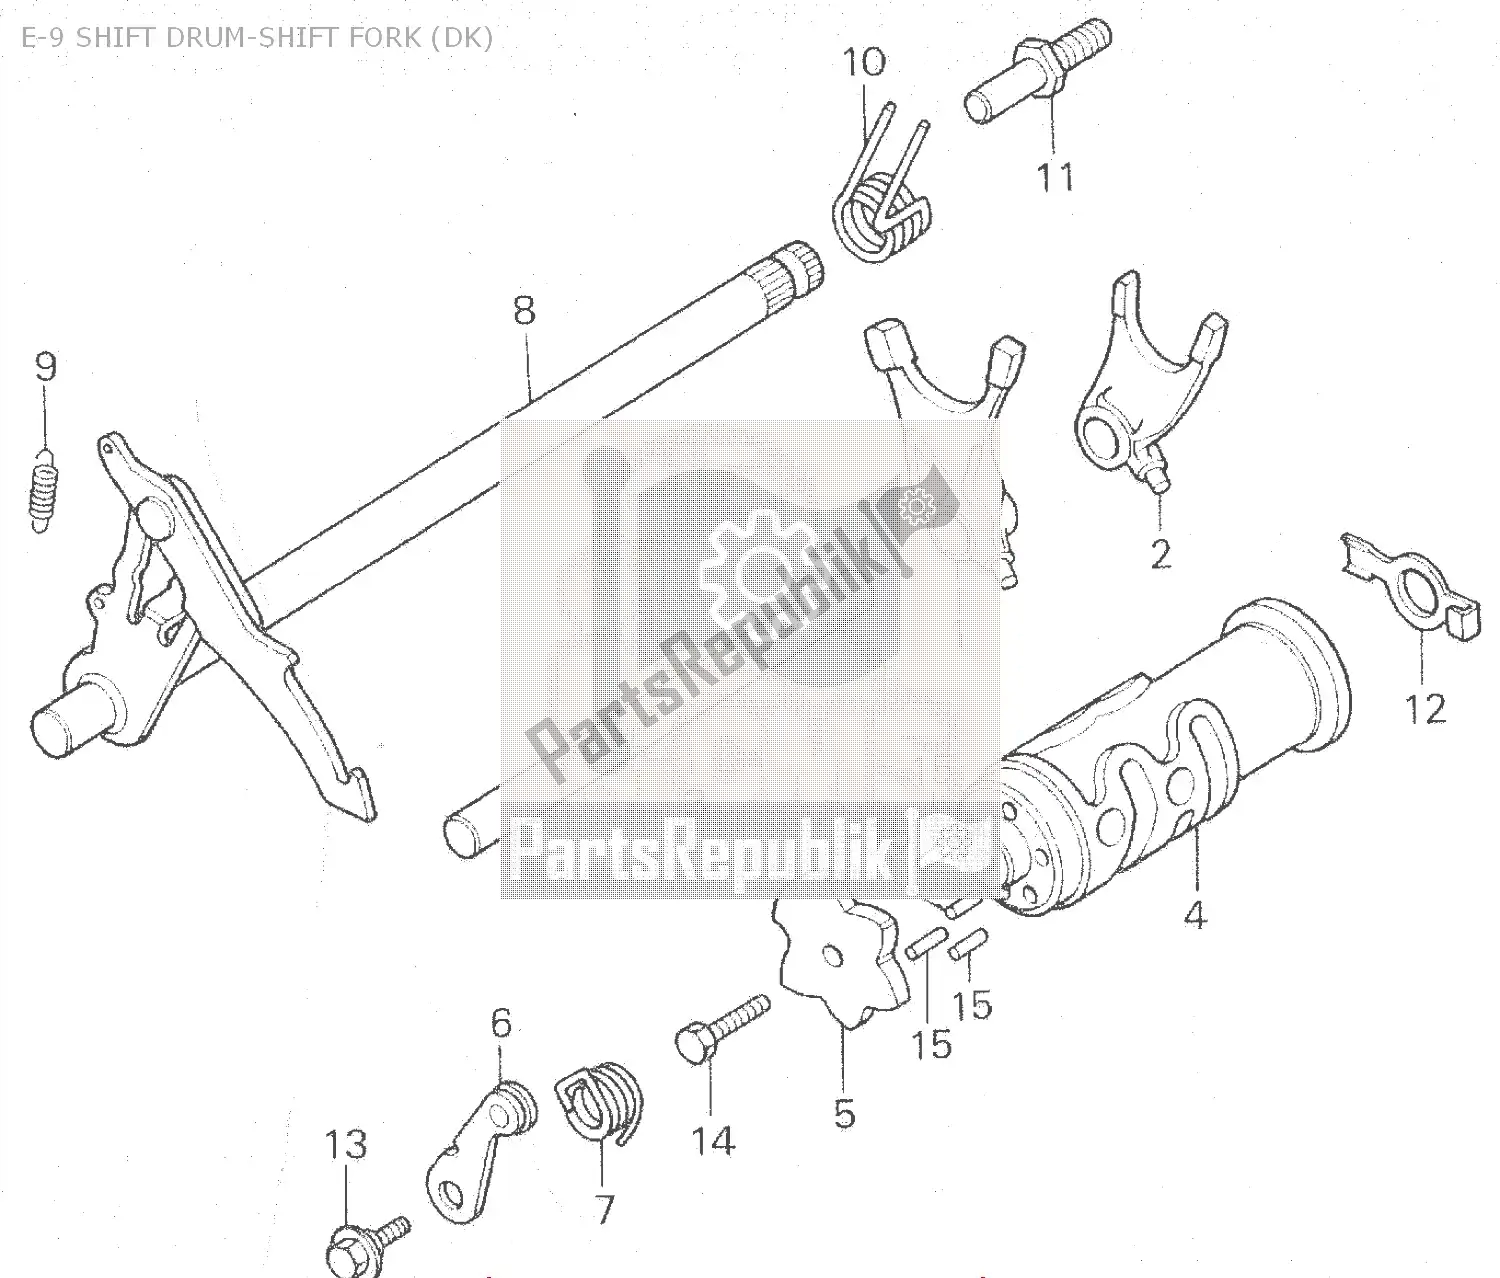 All parts for the E-9 Shift Drum-shift Fork (dk) of the Honda MB 100 1980